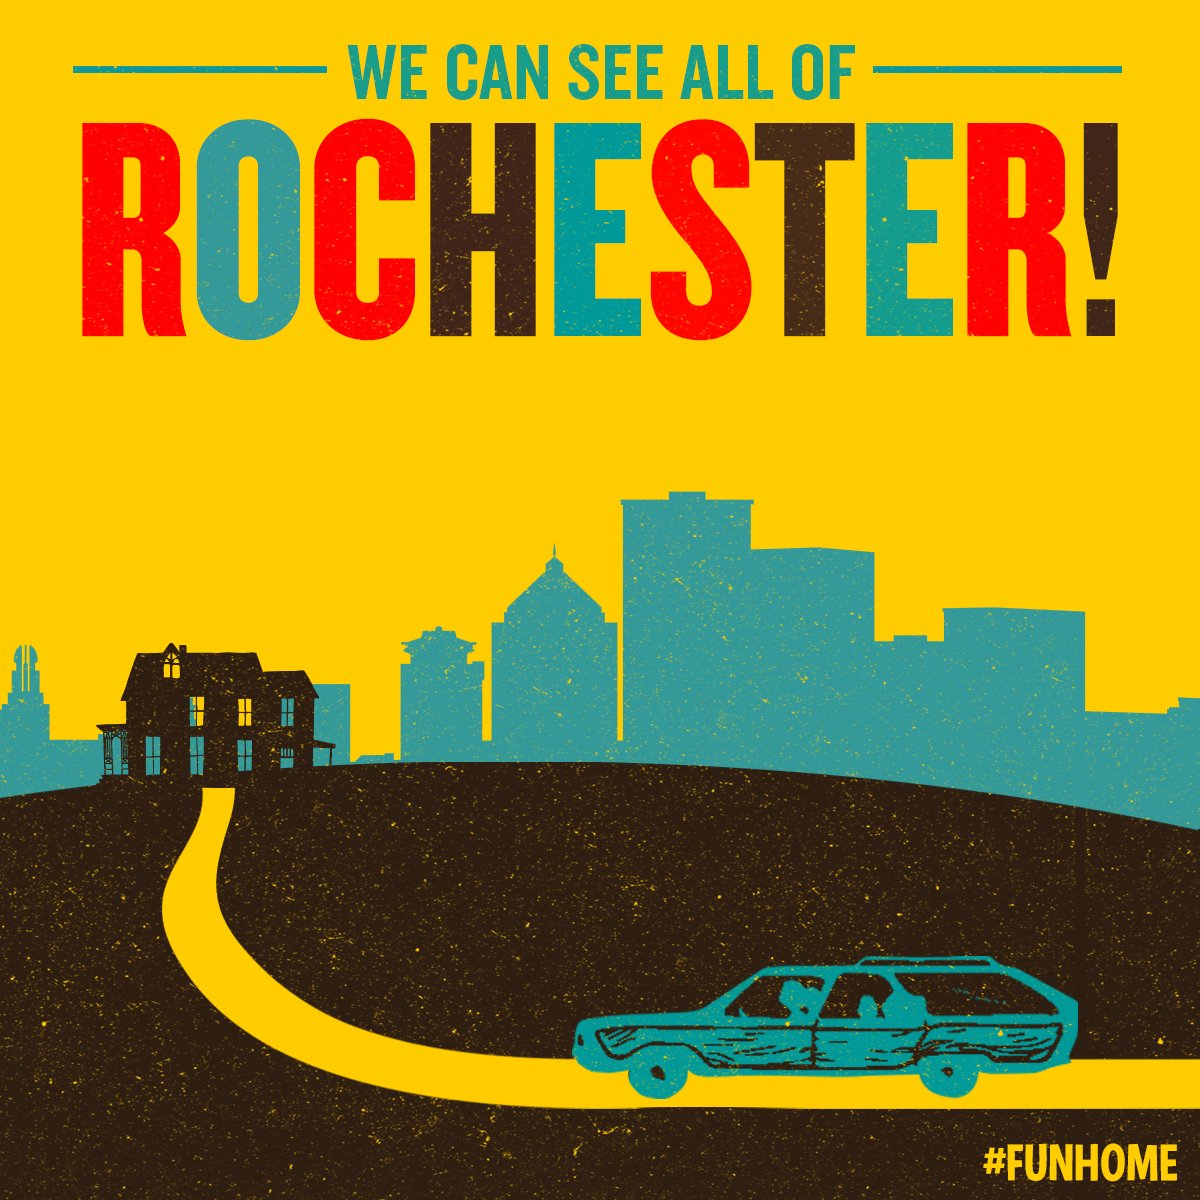 It's opening night at @RBTL, and we can see all of ROCHESTER! Tickets: funho.me/2cfUKUR #FunHome